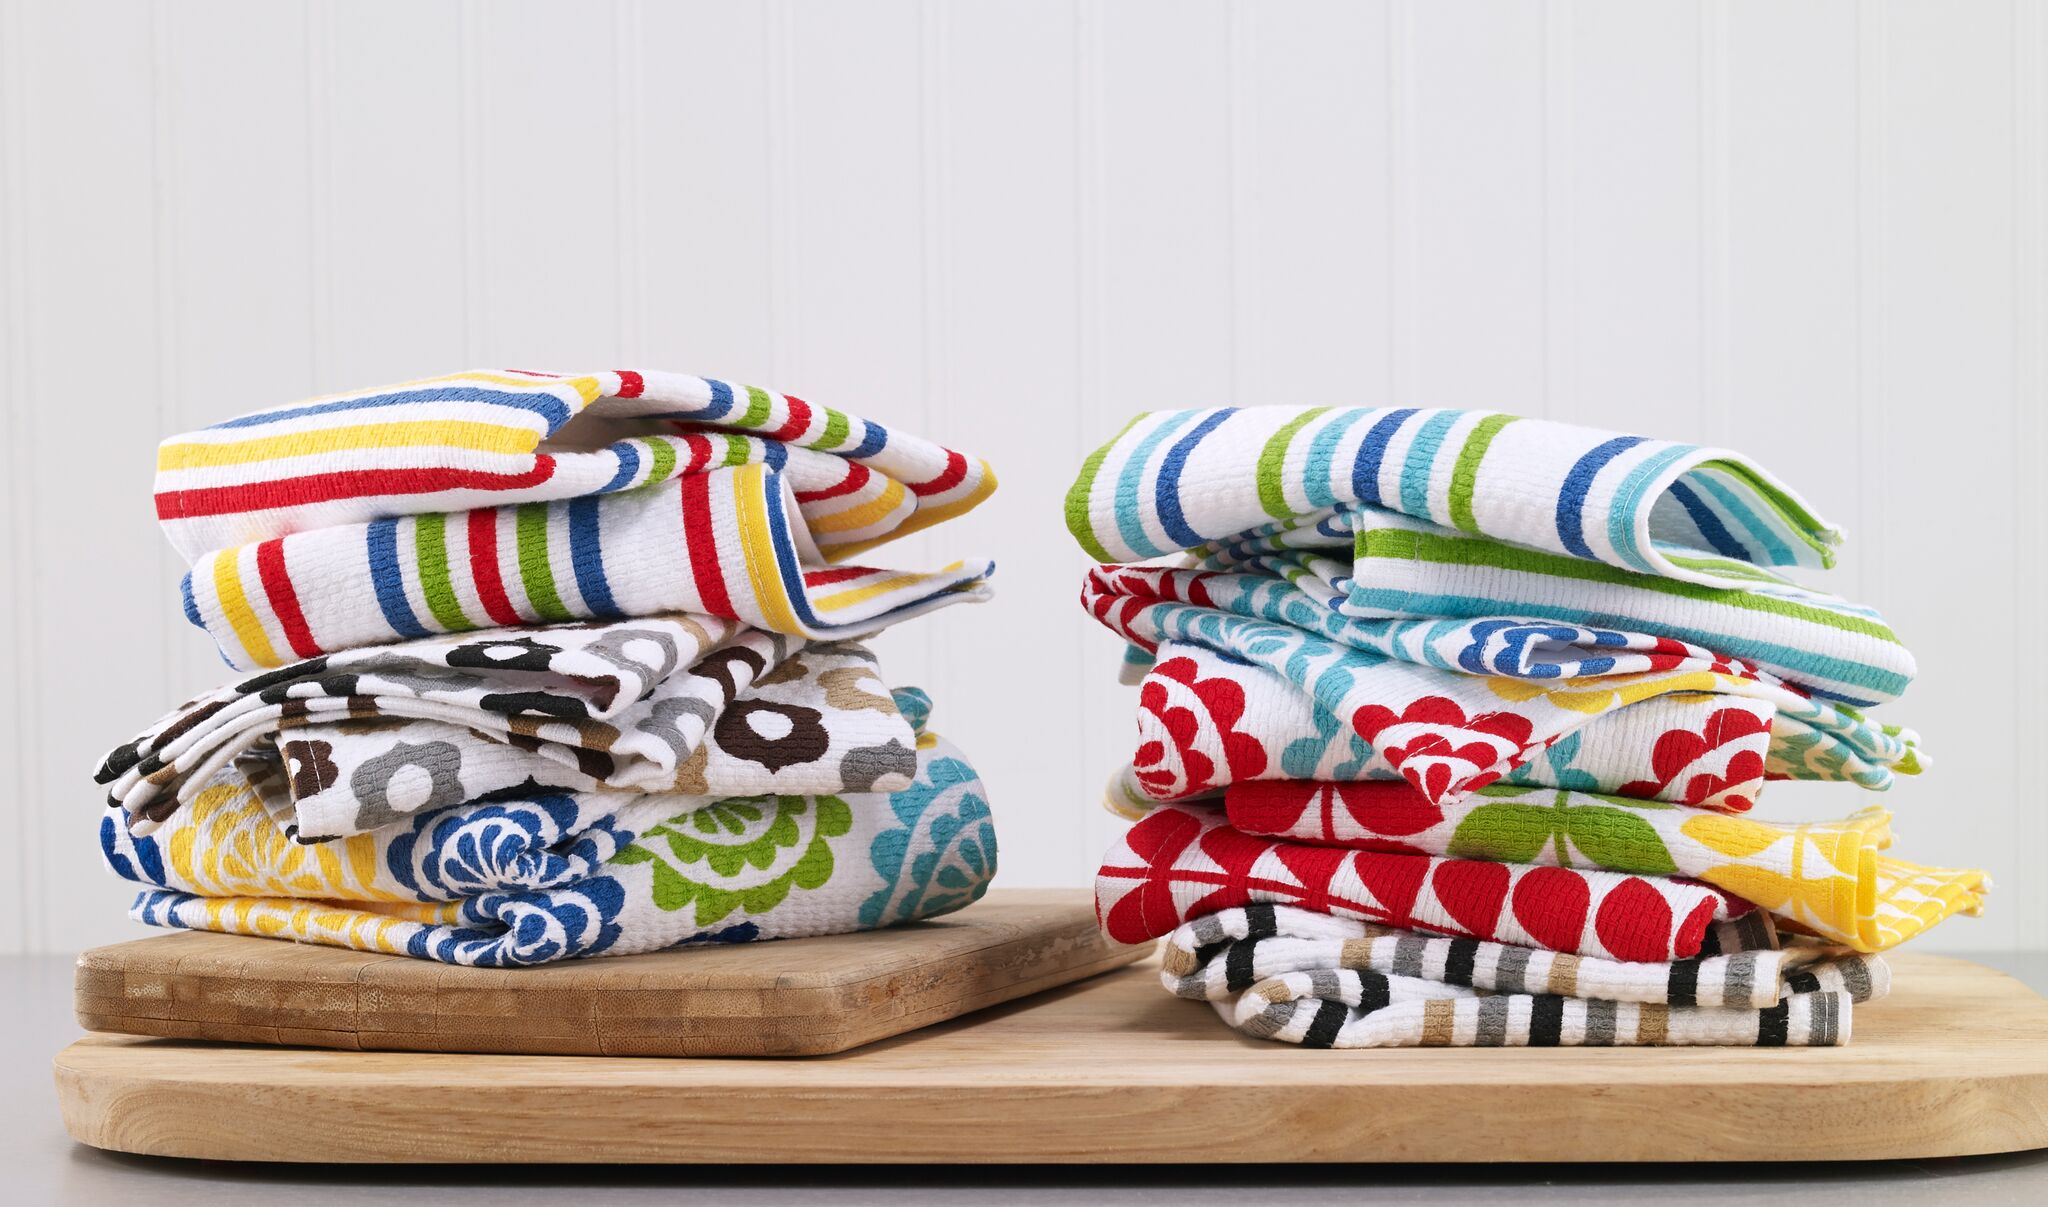 https://www.johnritz.com/wp-content/uploads/2018/06/T-fal-Double-Sided-Printed-Dish-Cloths.jpeg